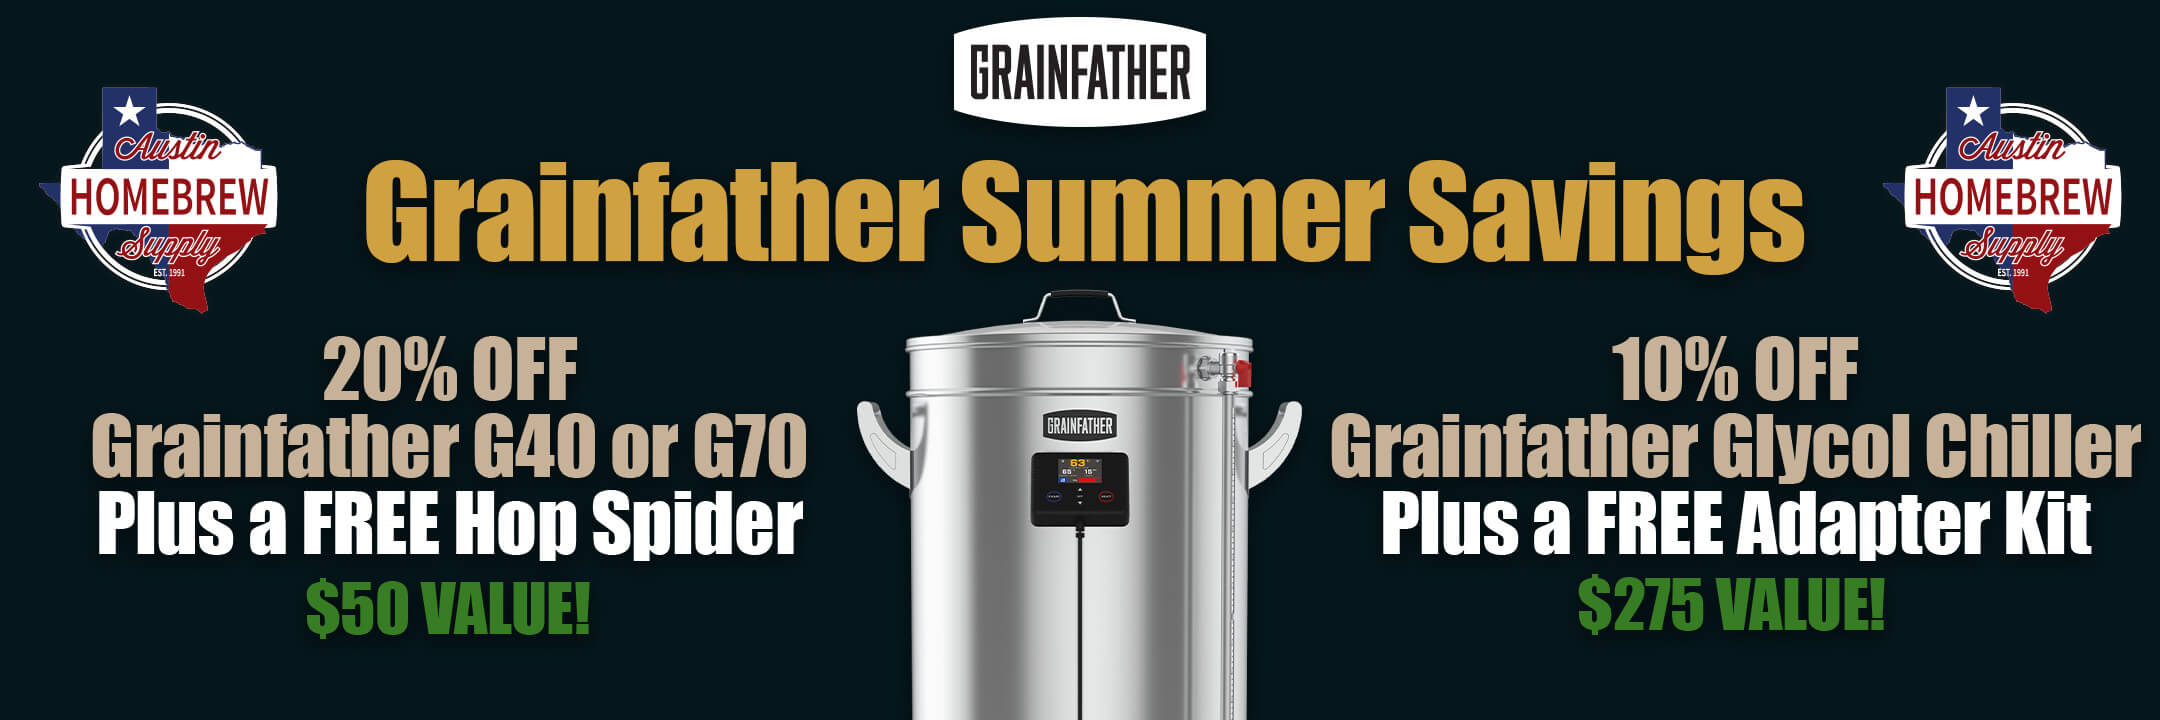 Grainfather Summer Savings. 20% Off G40 or G70 Electric All-in-One All-Grain Brewing System. 10% Off GC2 or GC4 Glycol Chiller.